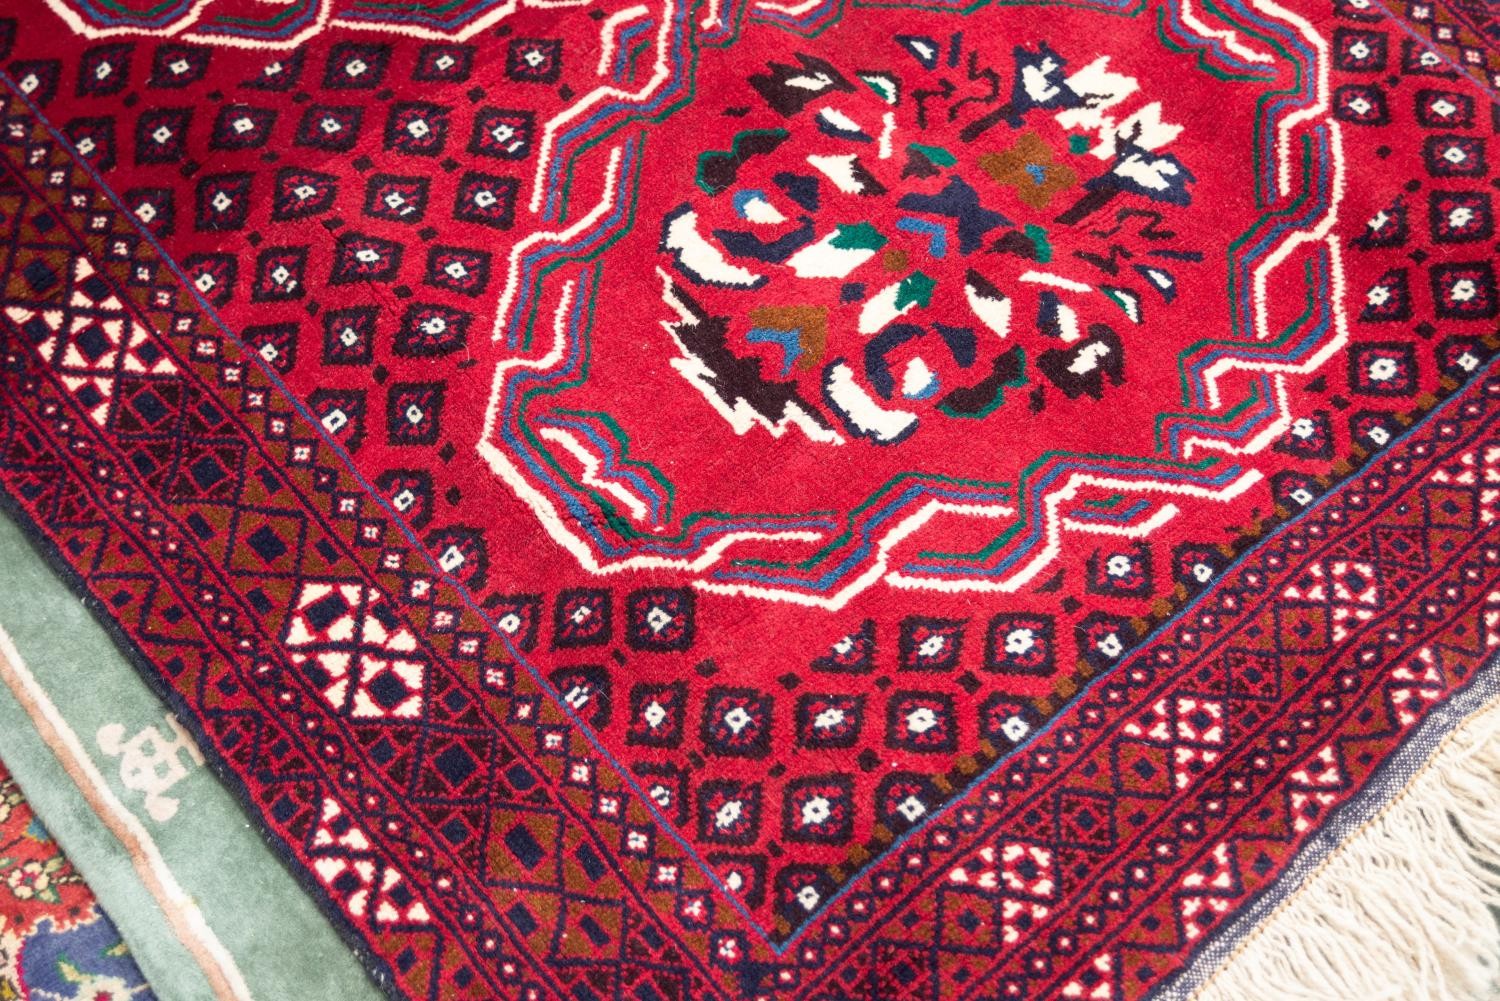 IRANIAN BALOUCHI HAND KNOTTED WOOL RUG, with tulip large medallion pattern on a wine red field - Image 2 of 2